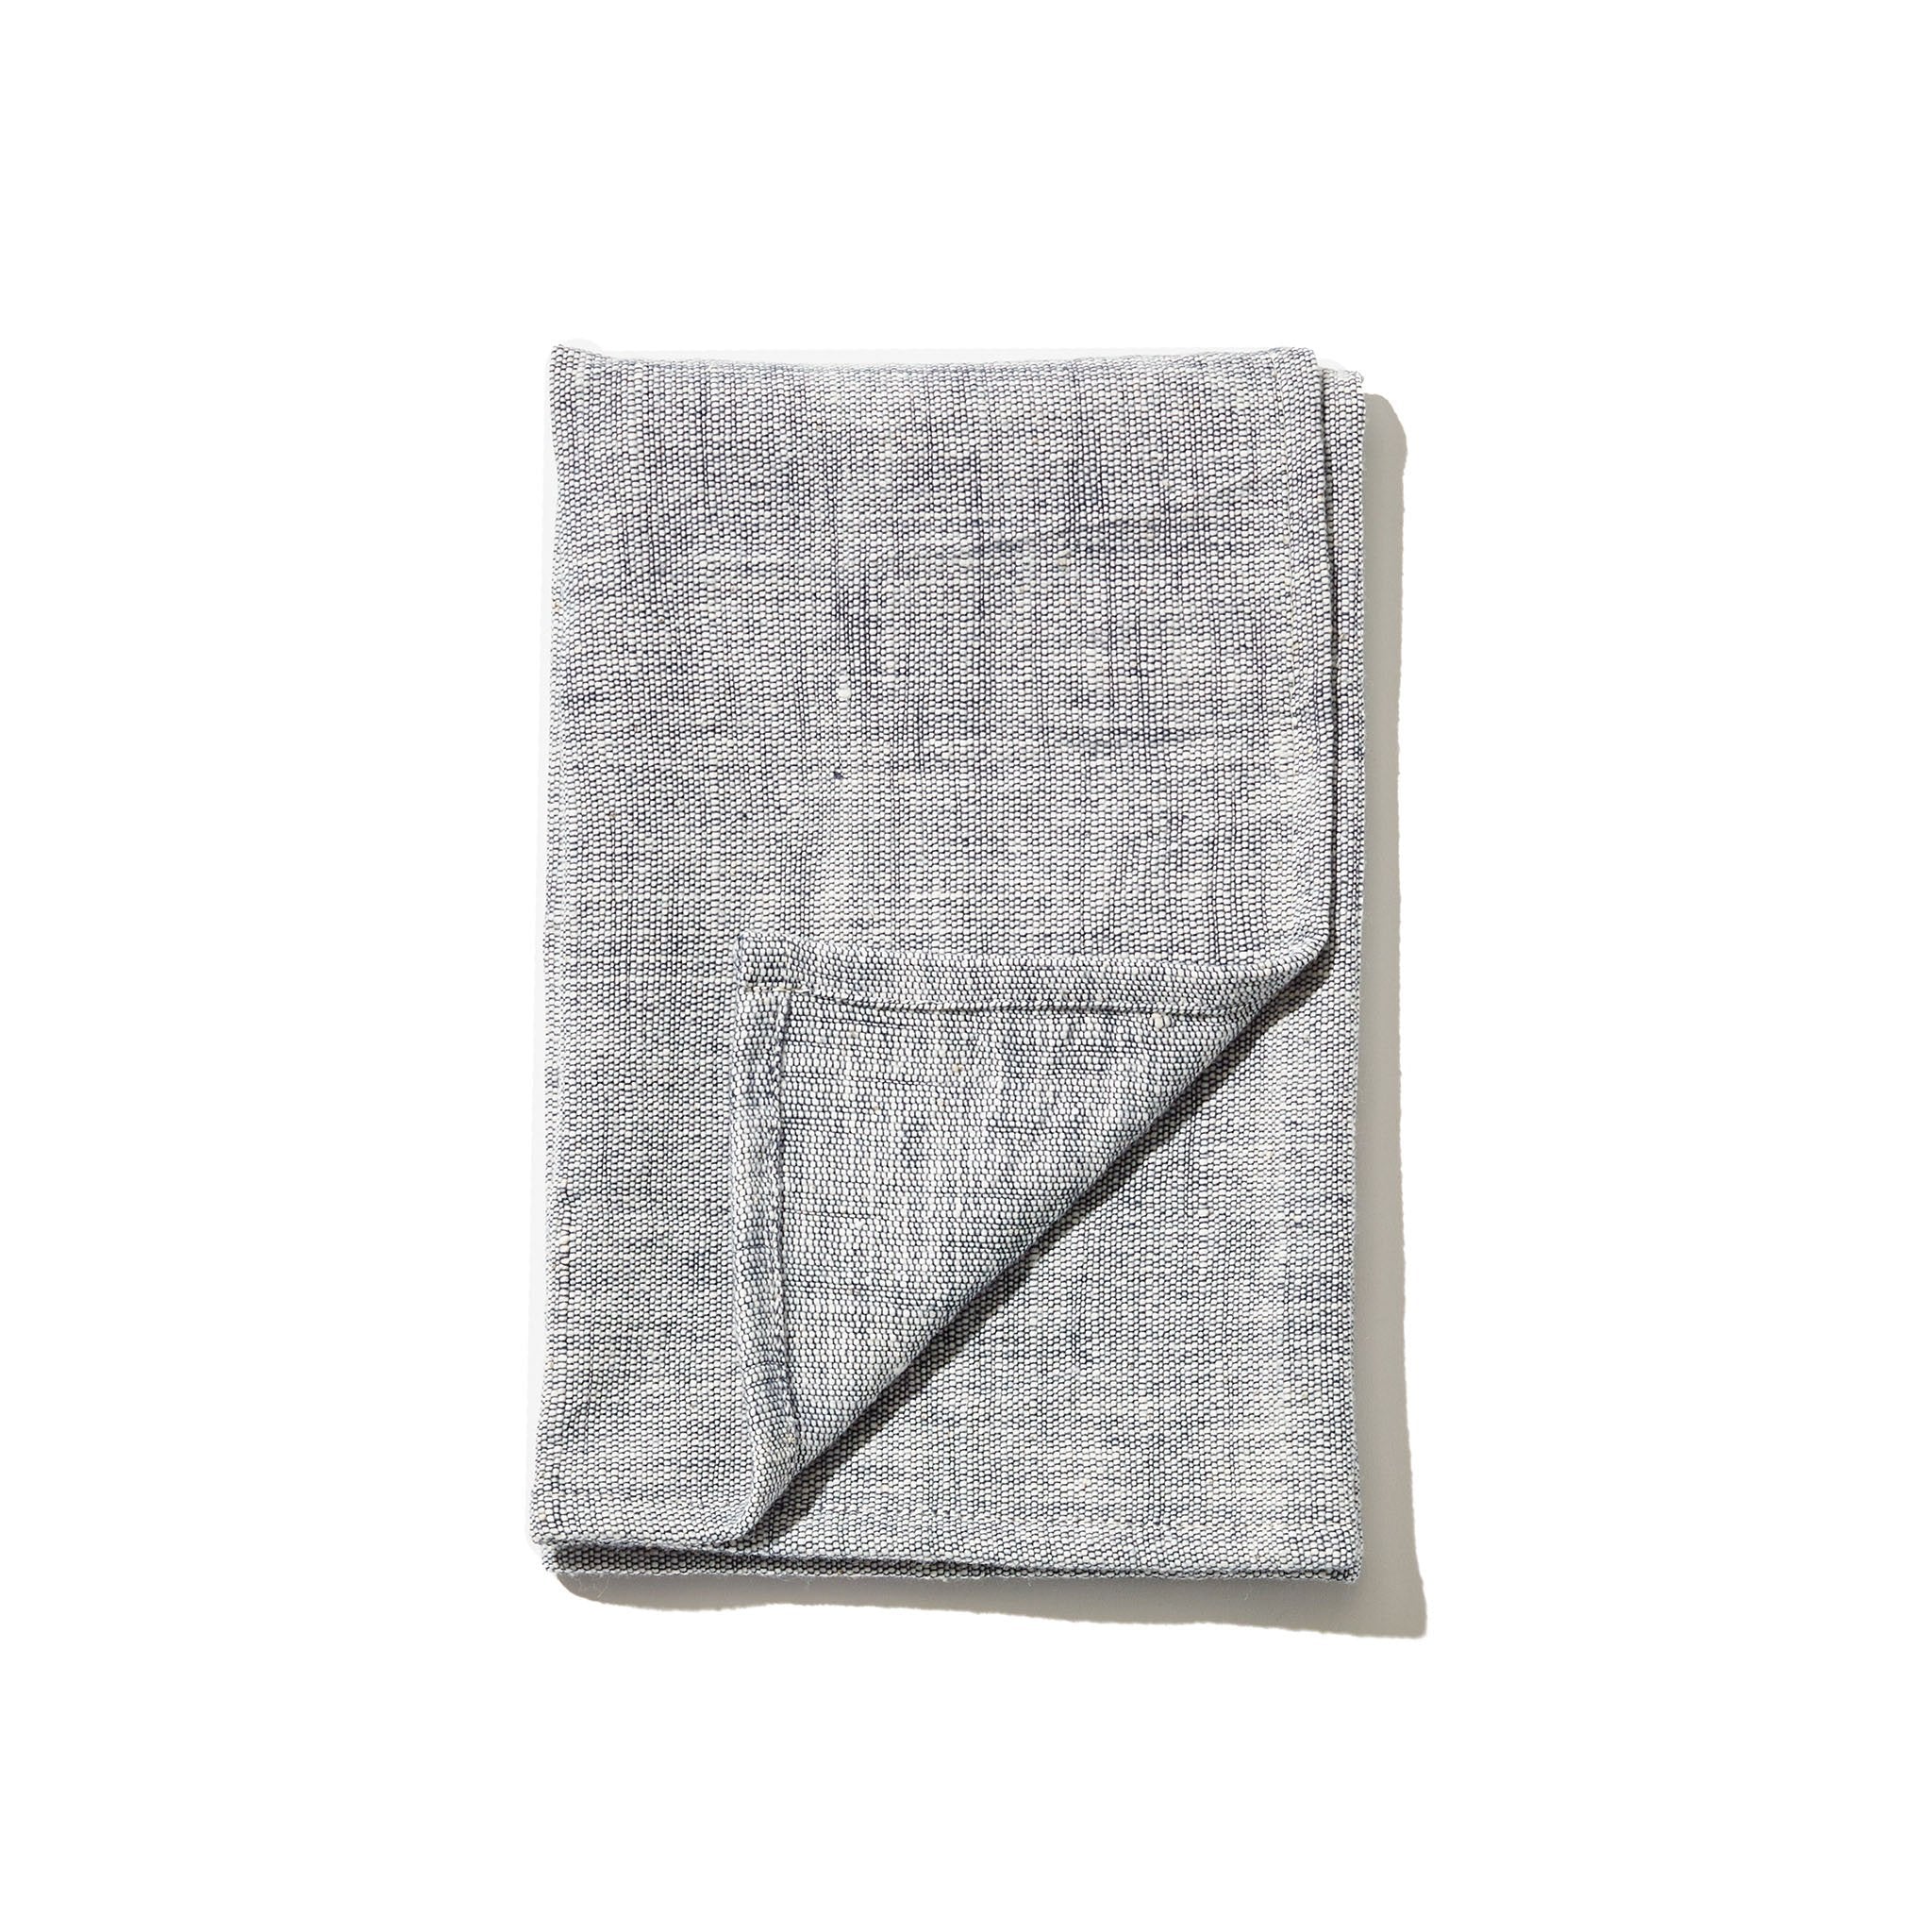 Simple yet chic napkins in a beige washed fabric made from 100% hand-loomed Ethiopian cotton.